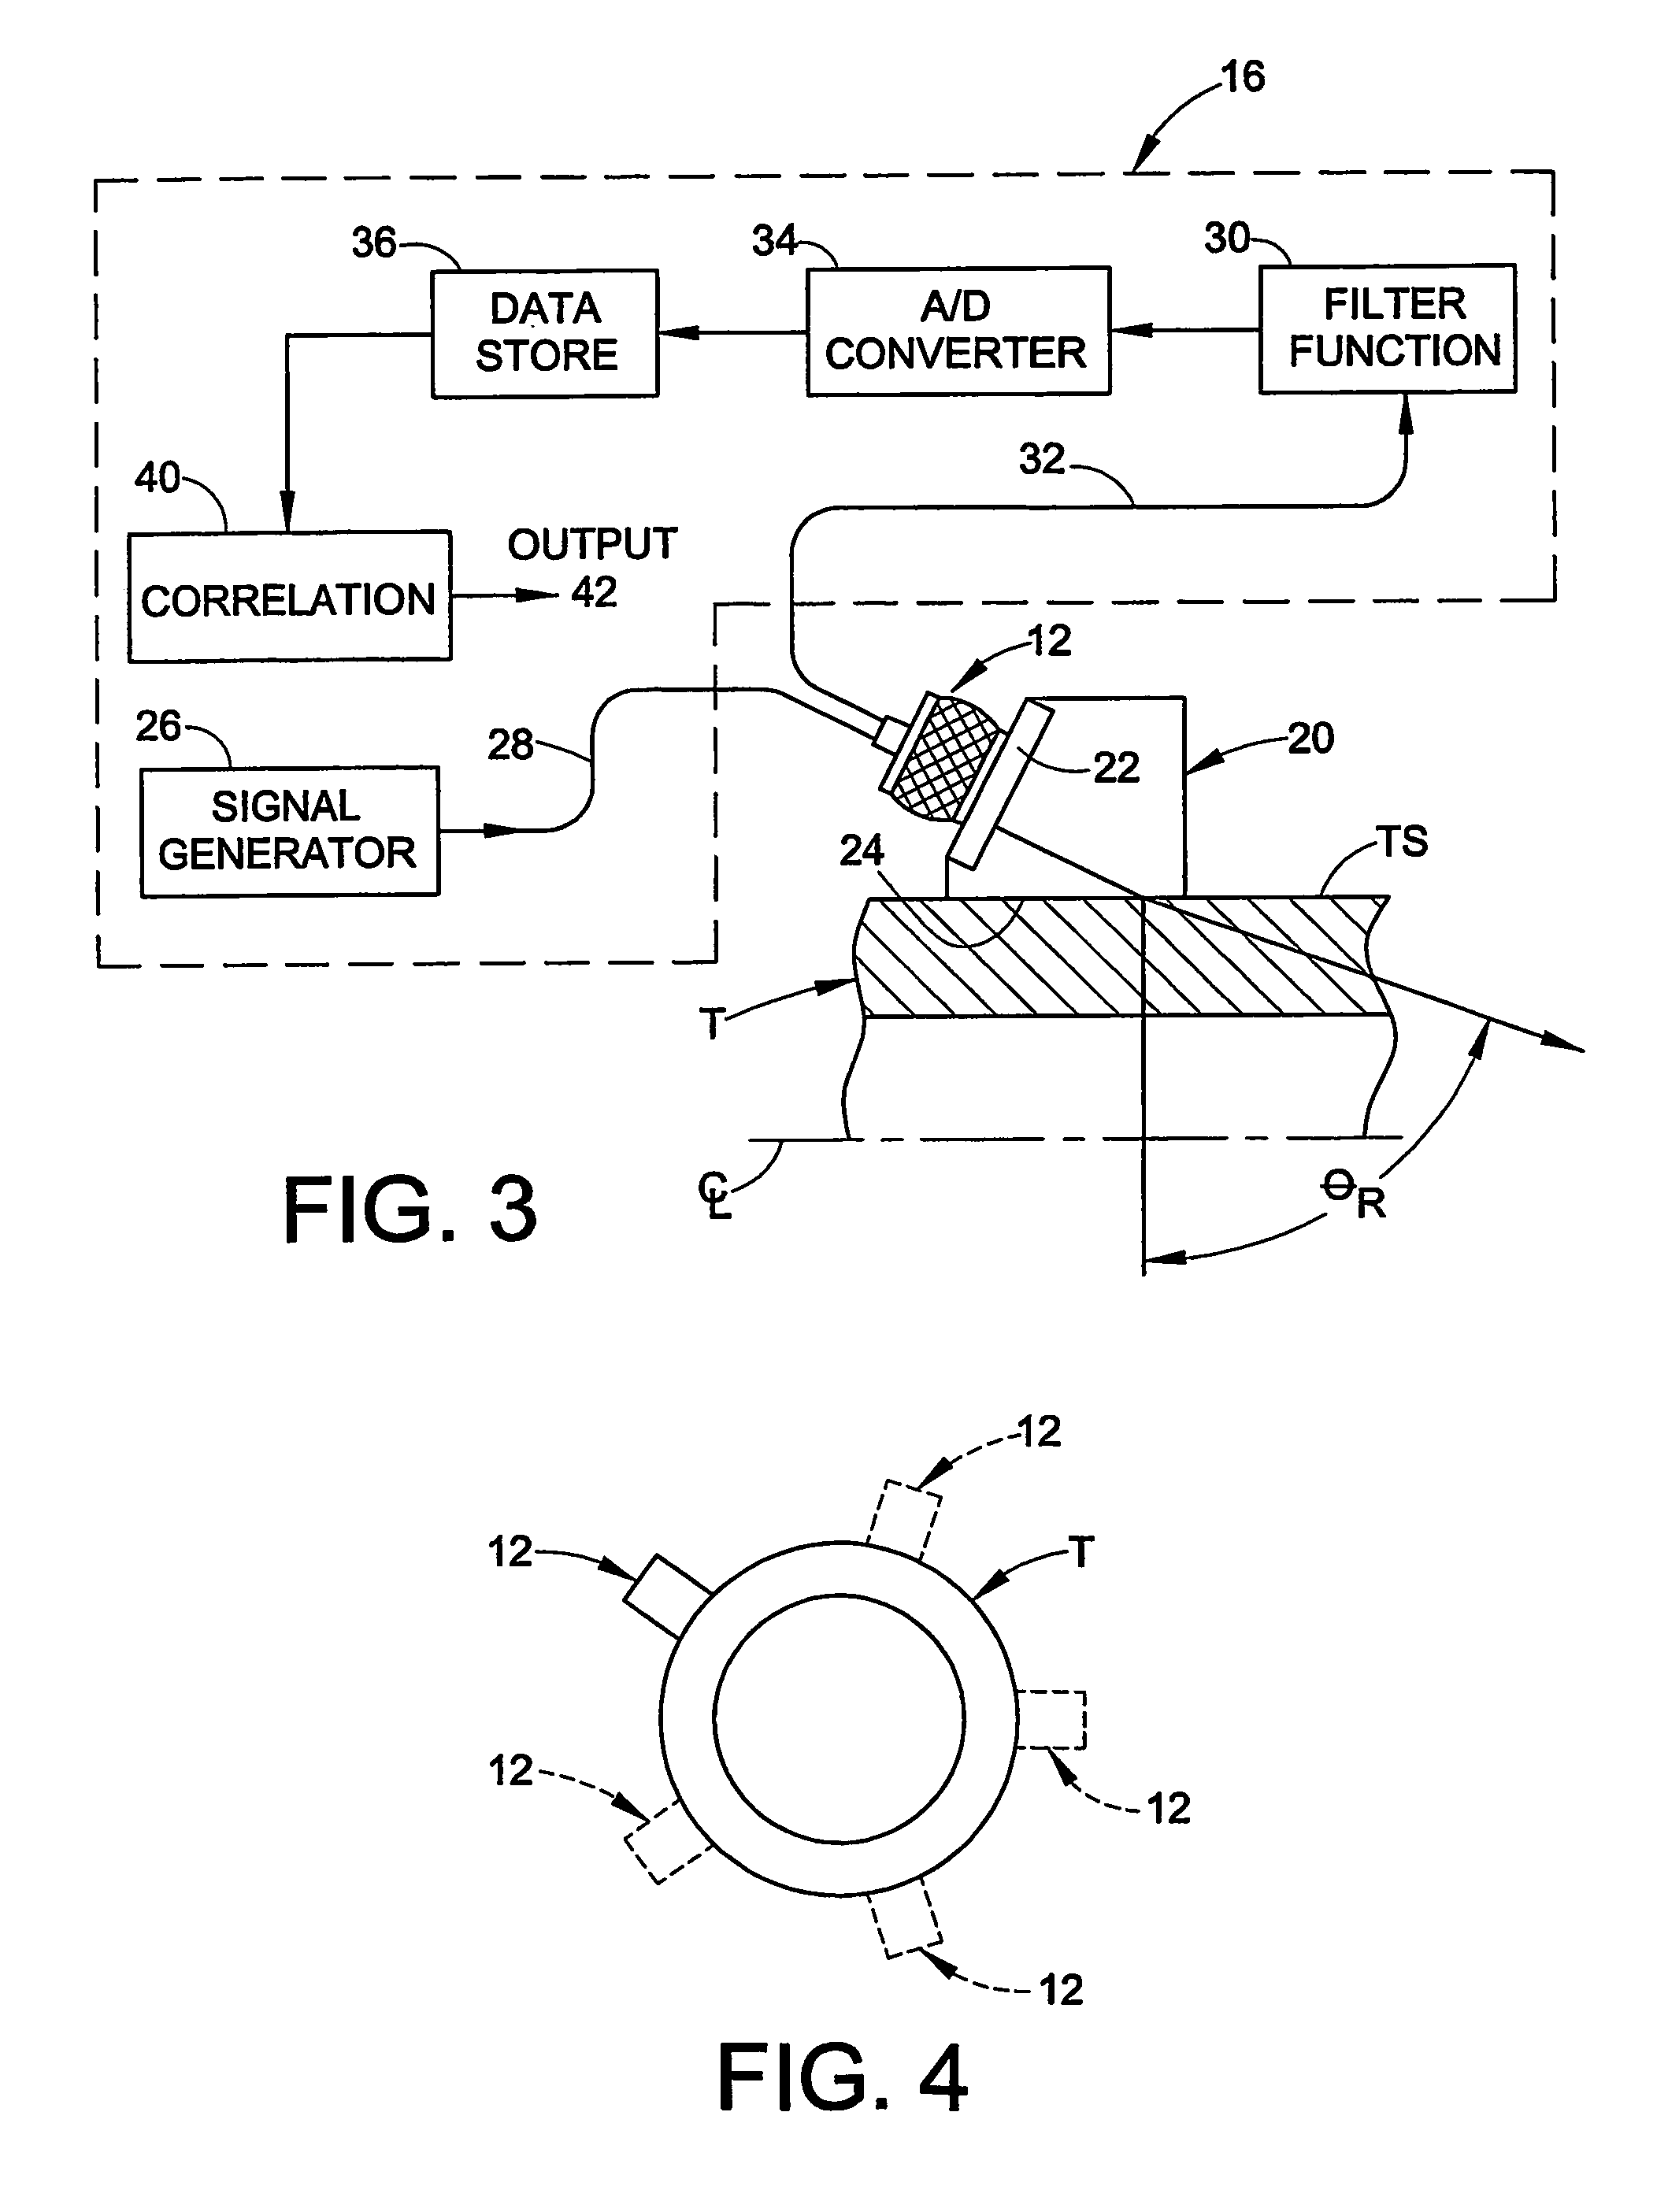 Ultrasonic testing of fitting assembly for fluid conduits with a hand-held apparatus